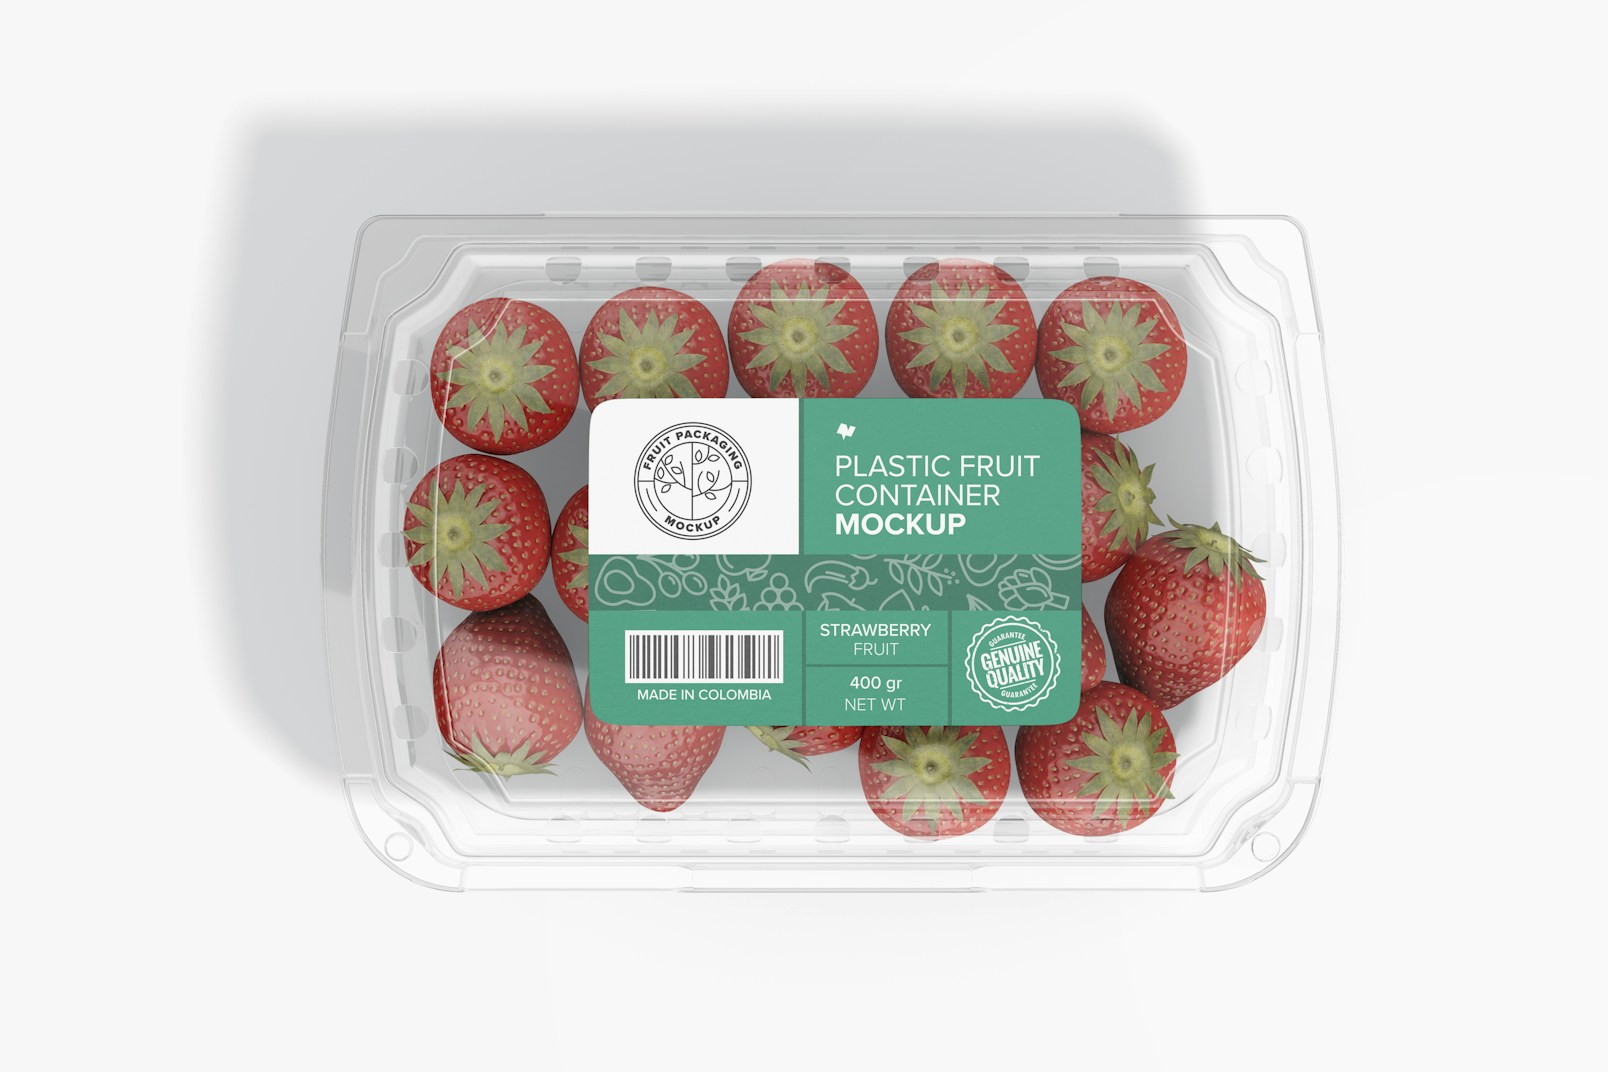 Plastic Fruit Container Mockup, Top View